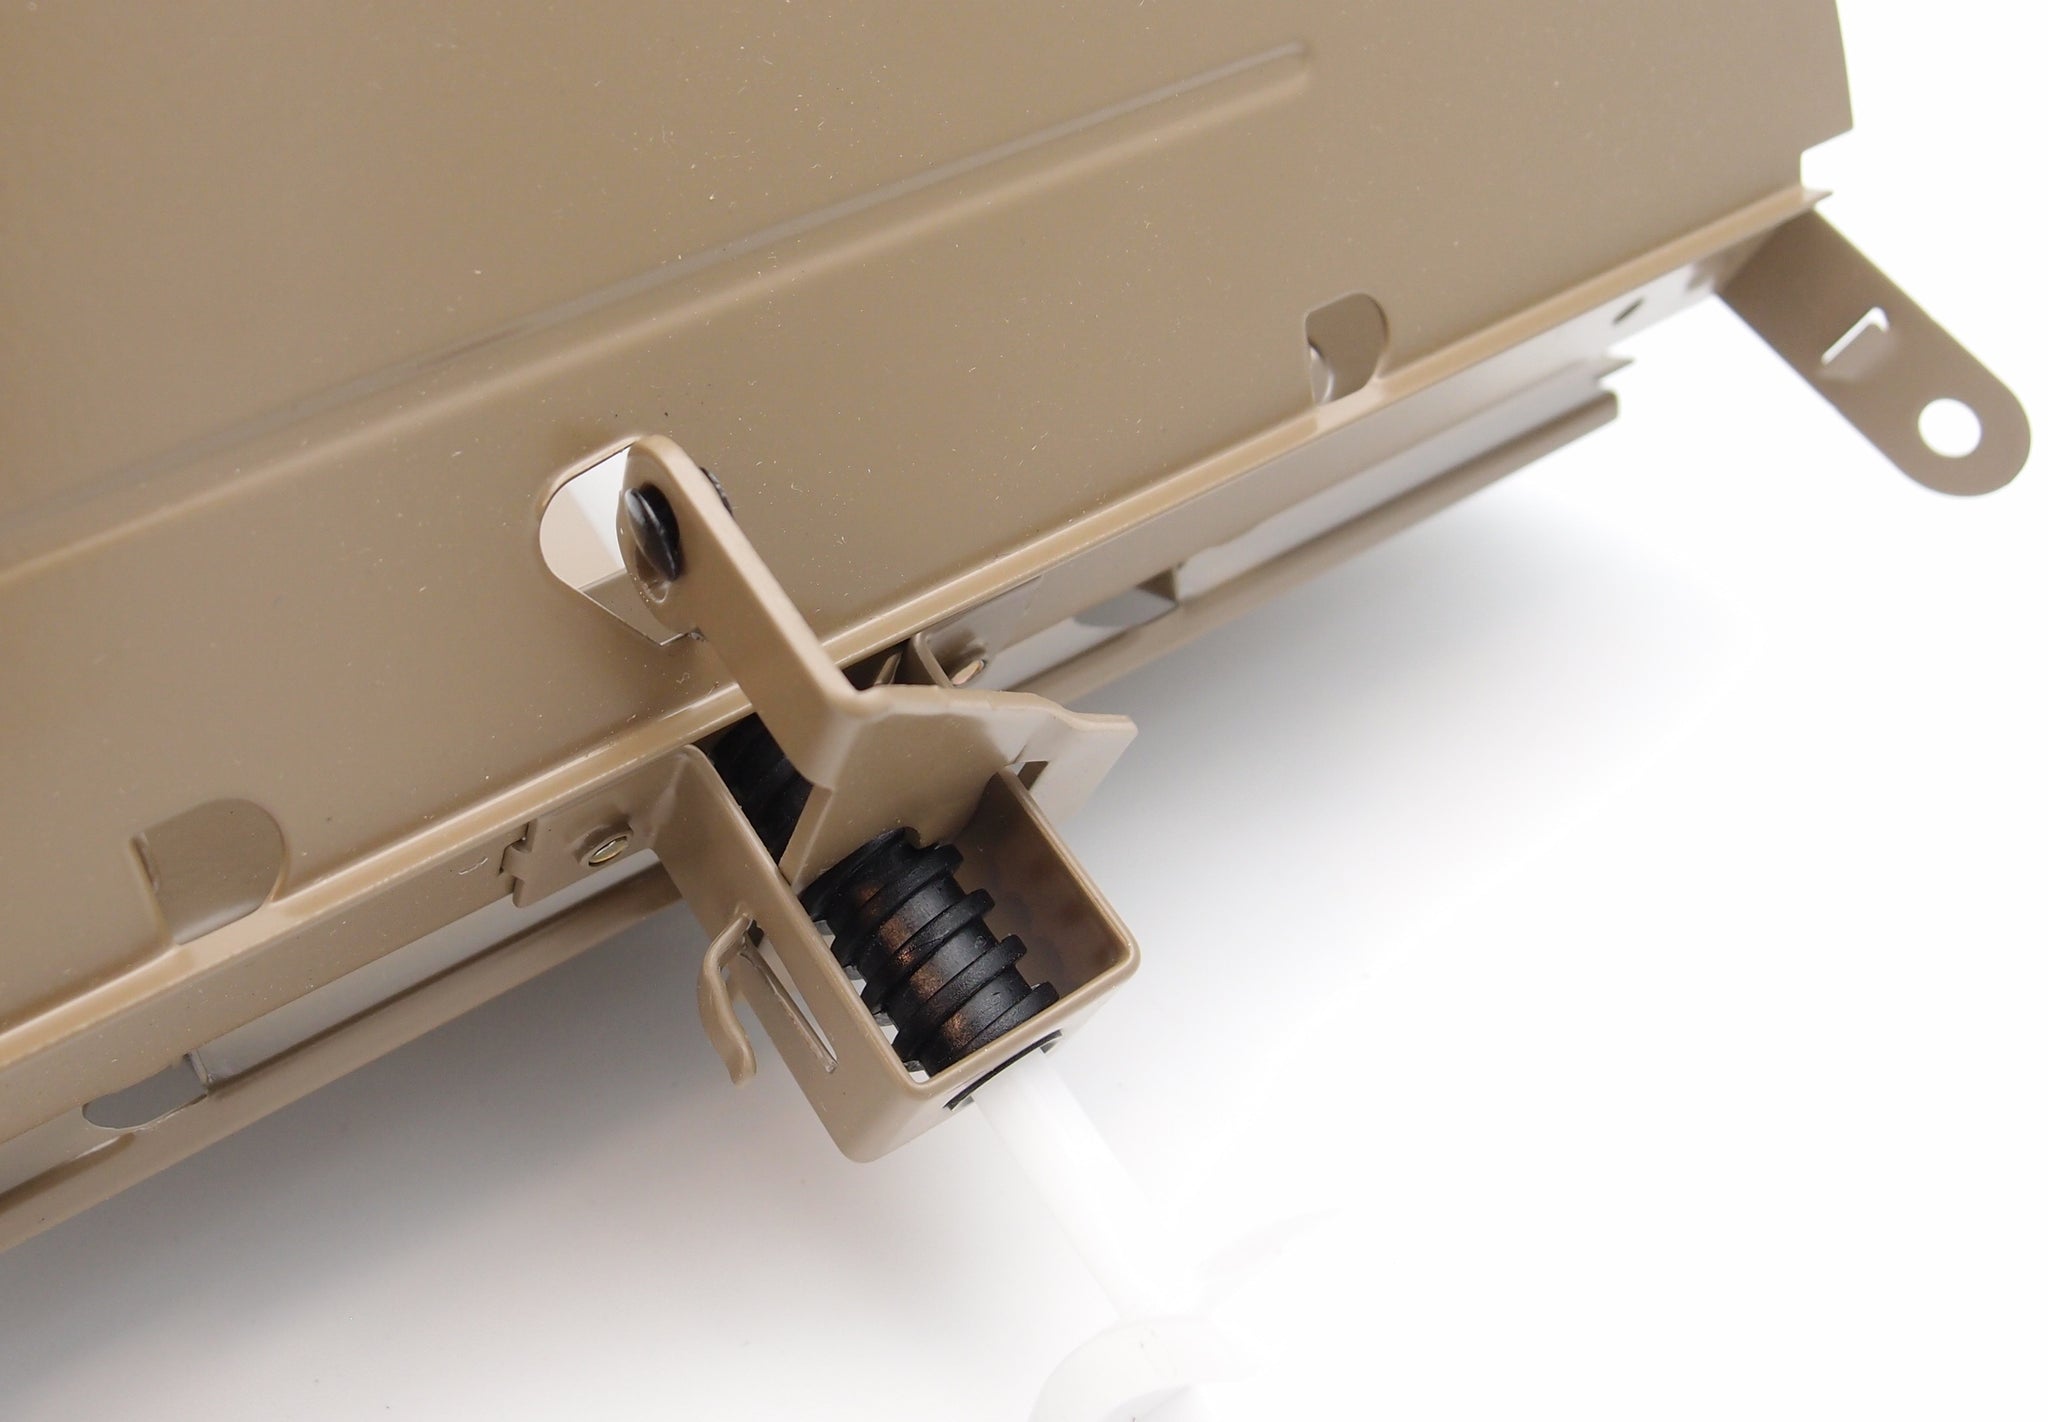 6 Butterfly Damper Control Your Airflow On Drop Ceiling